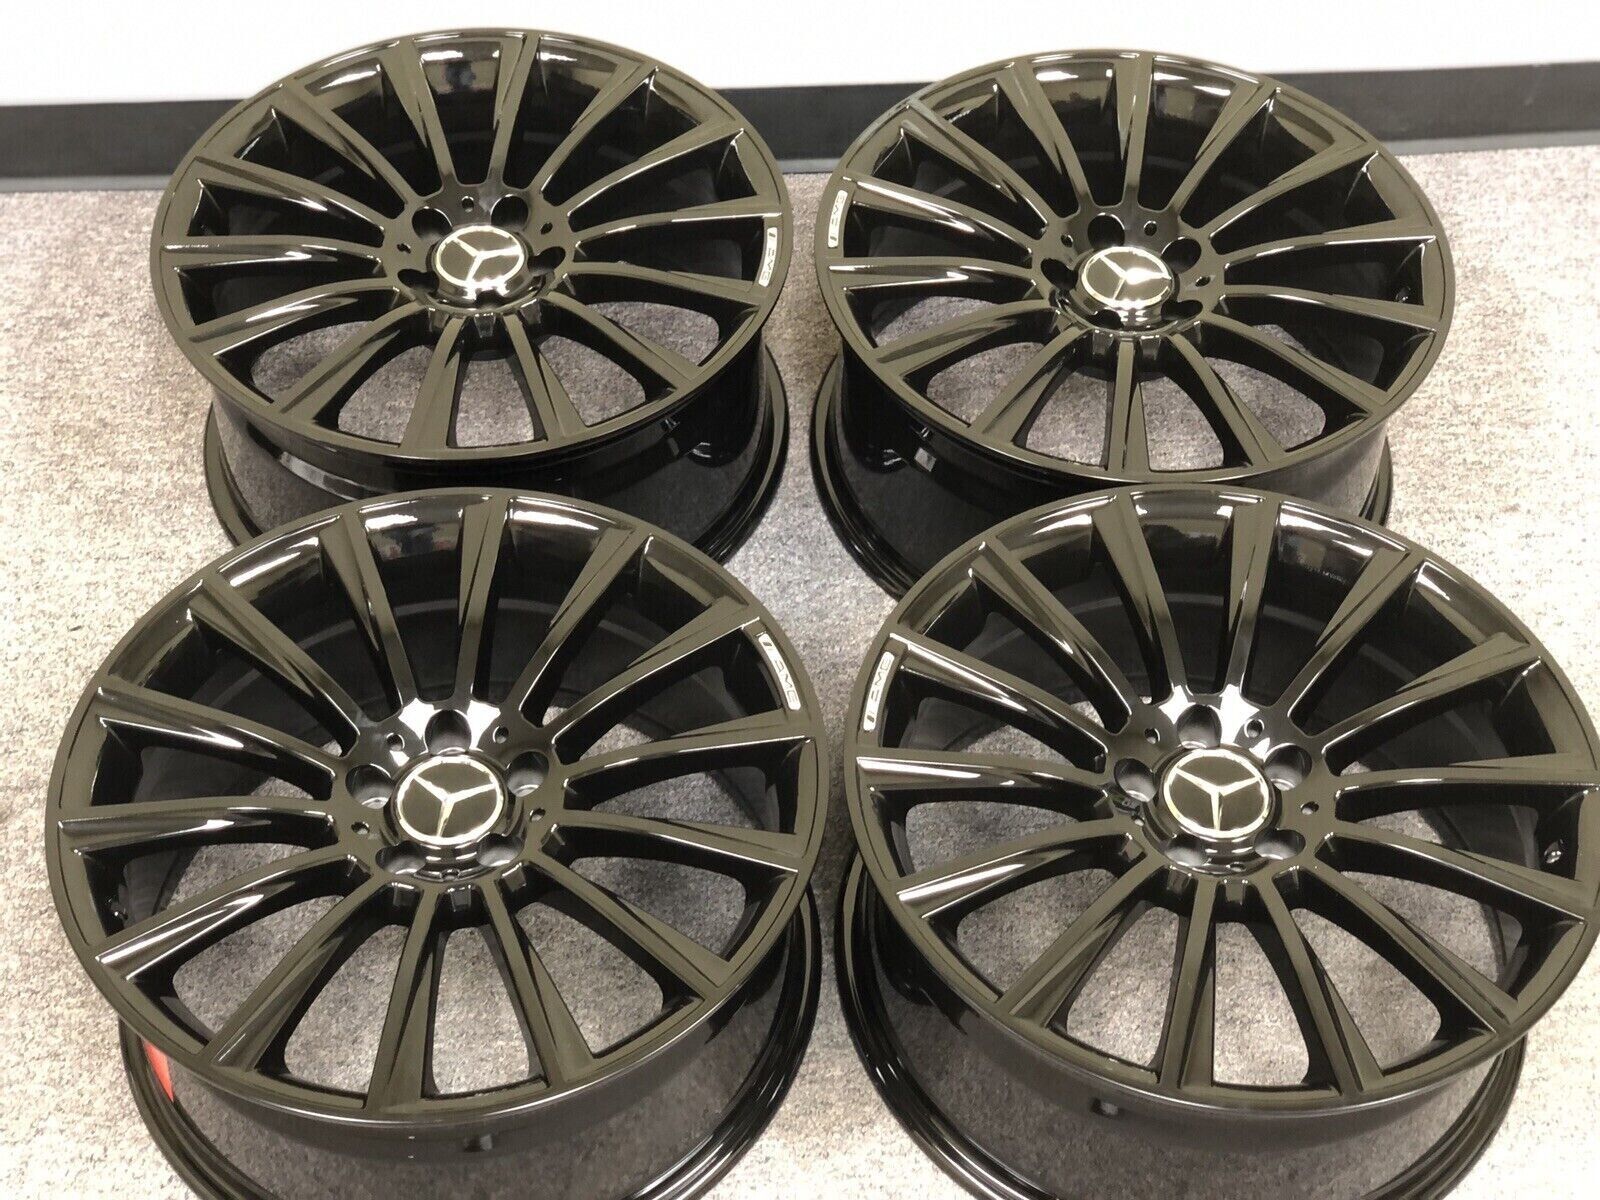 19” MERCEDES BENZ S STYLE GLOSS BLACK RIMS WHEELS TIRES S CLASS S430 S550 S580